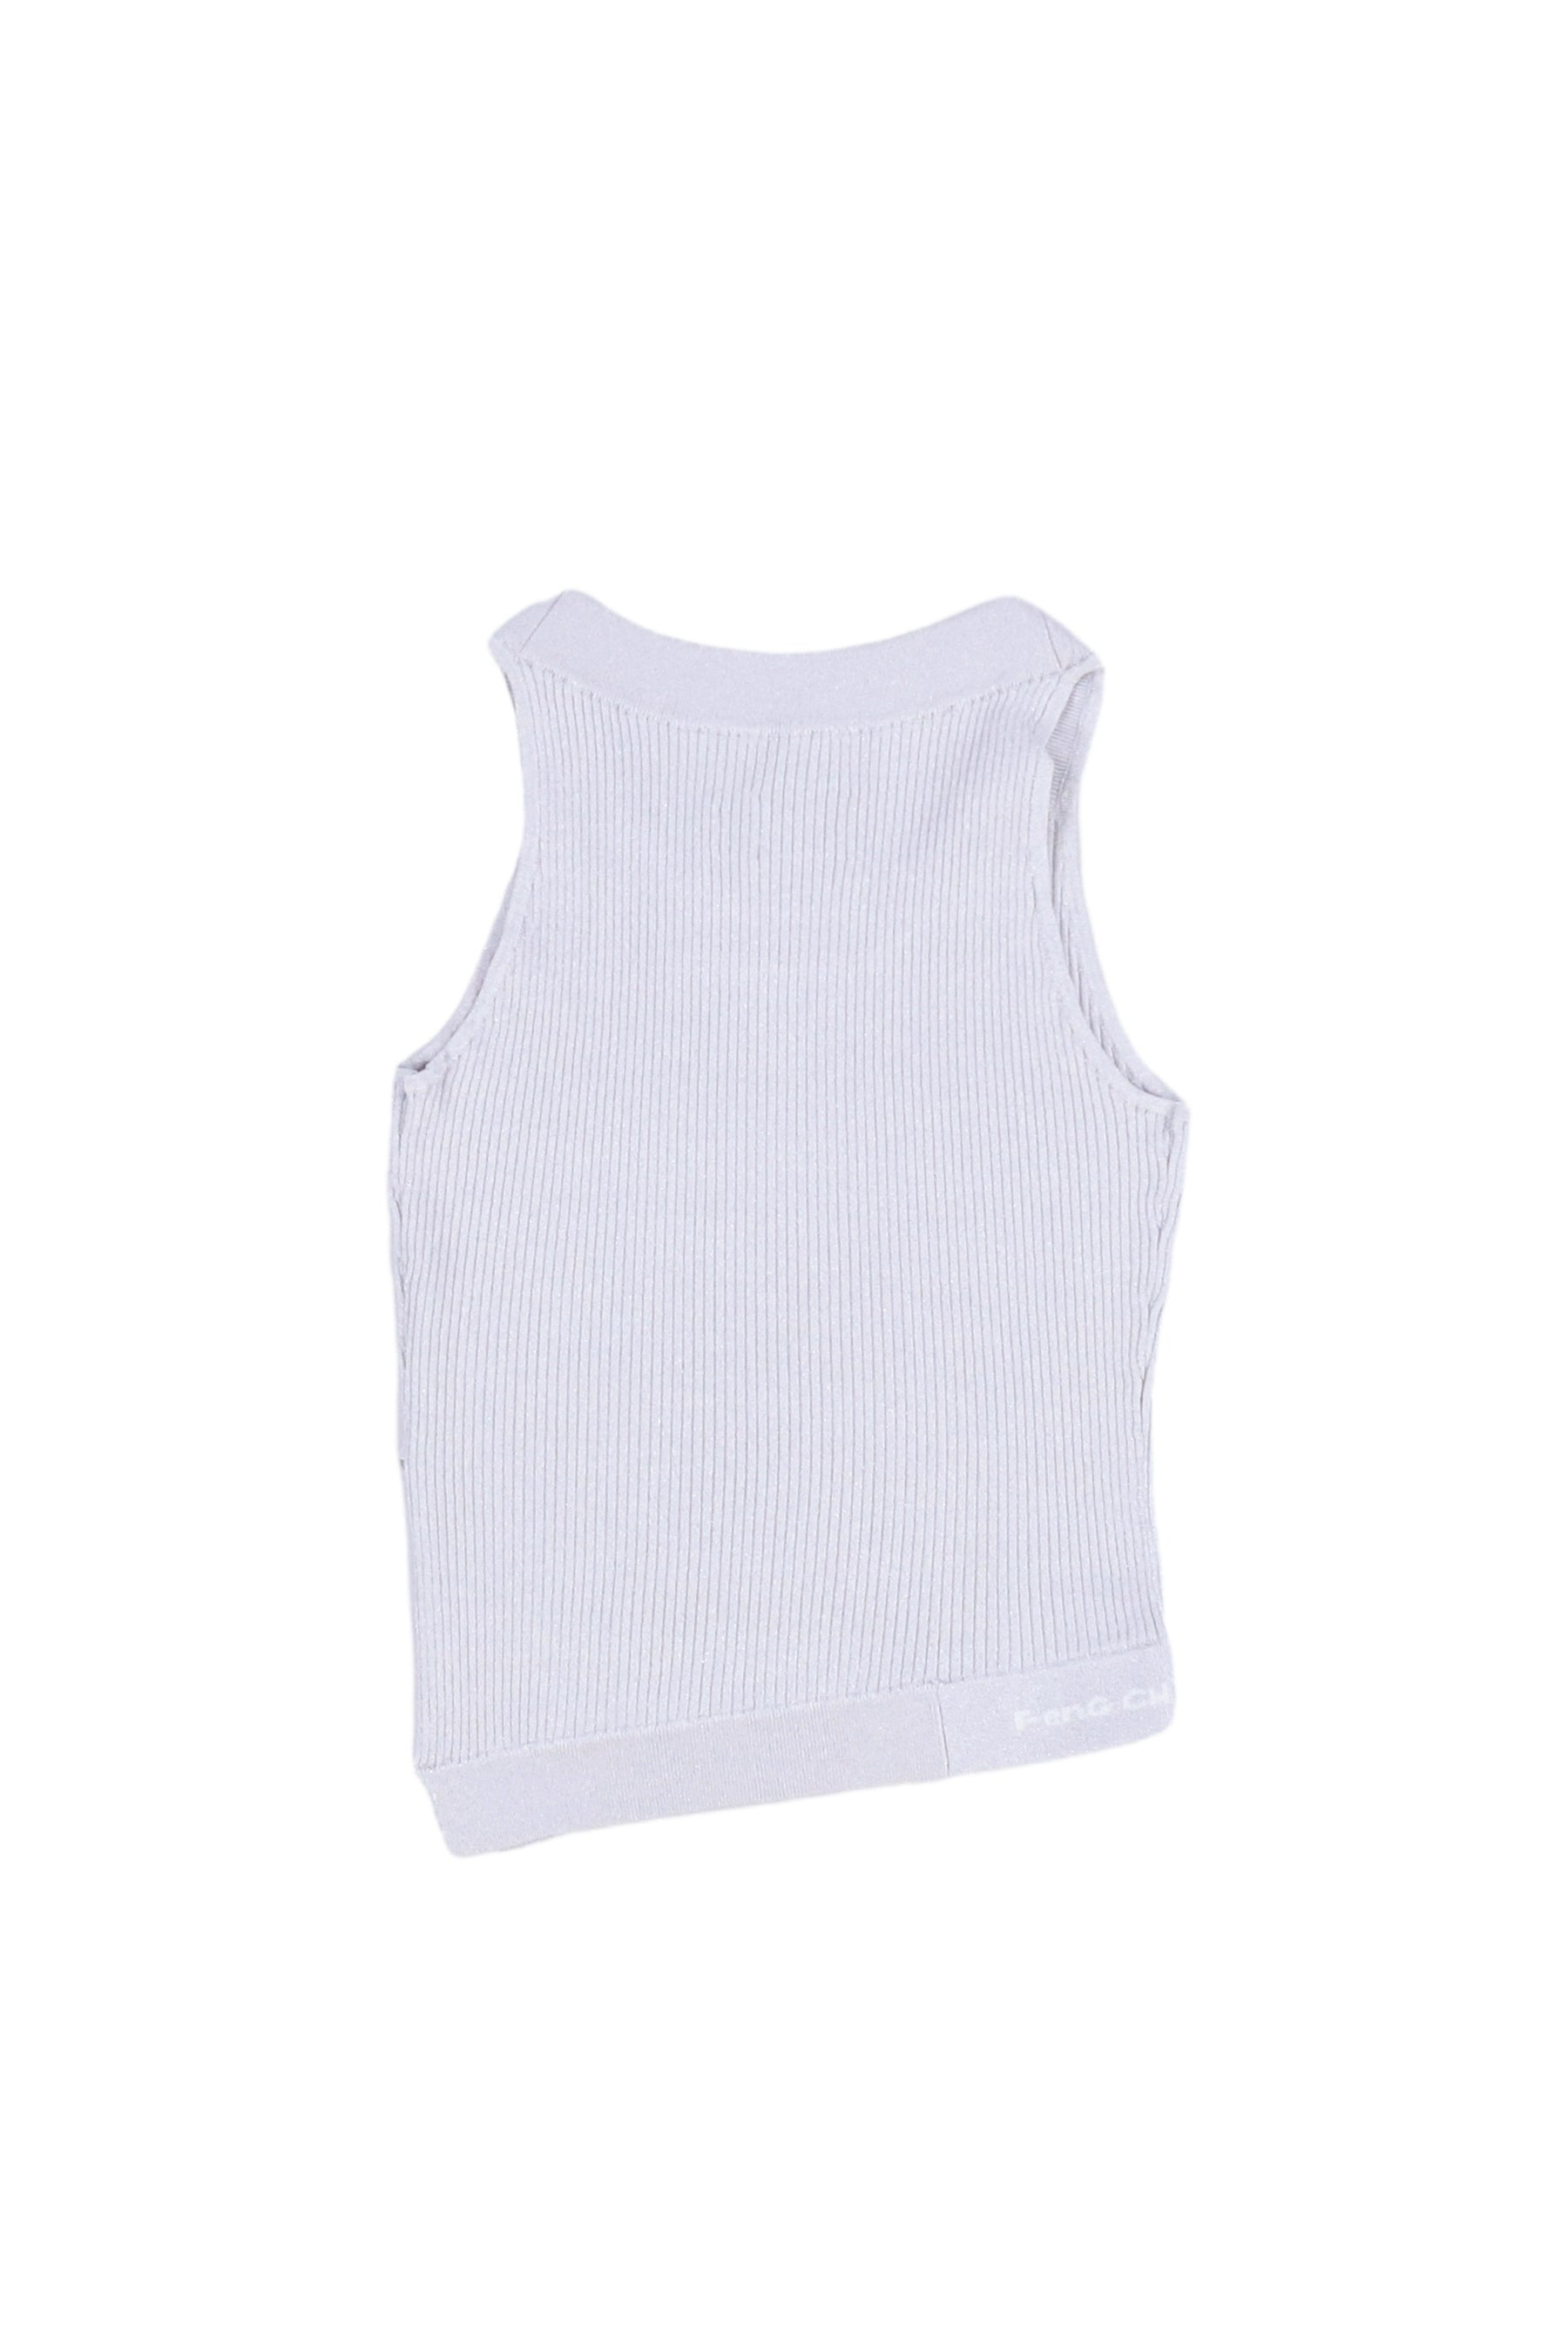 KNITTED TANK TOP / SIL - 2